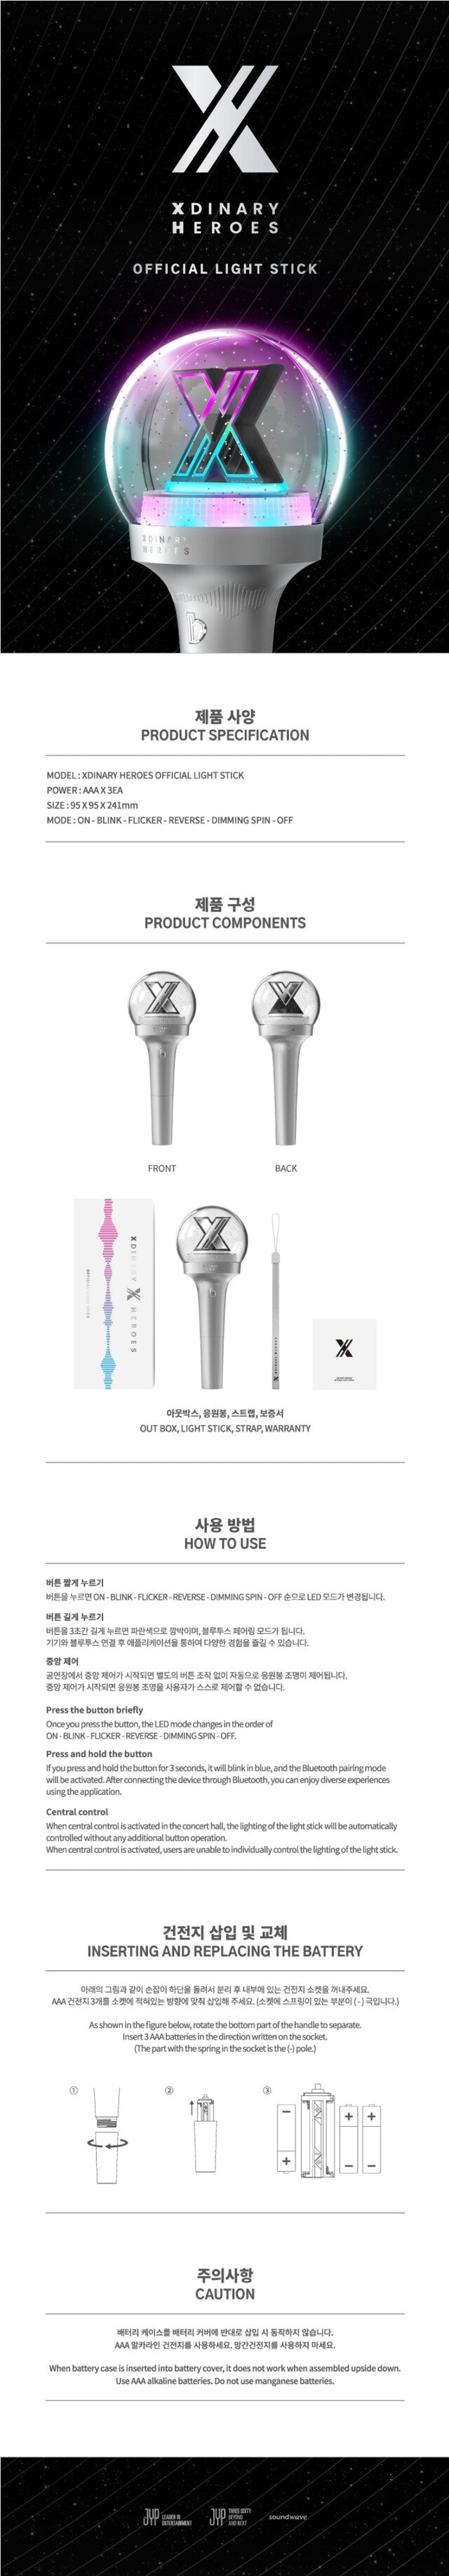 [PREORDER] XDINARY HEROES - OFFICIAL LIGHTSTICK